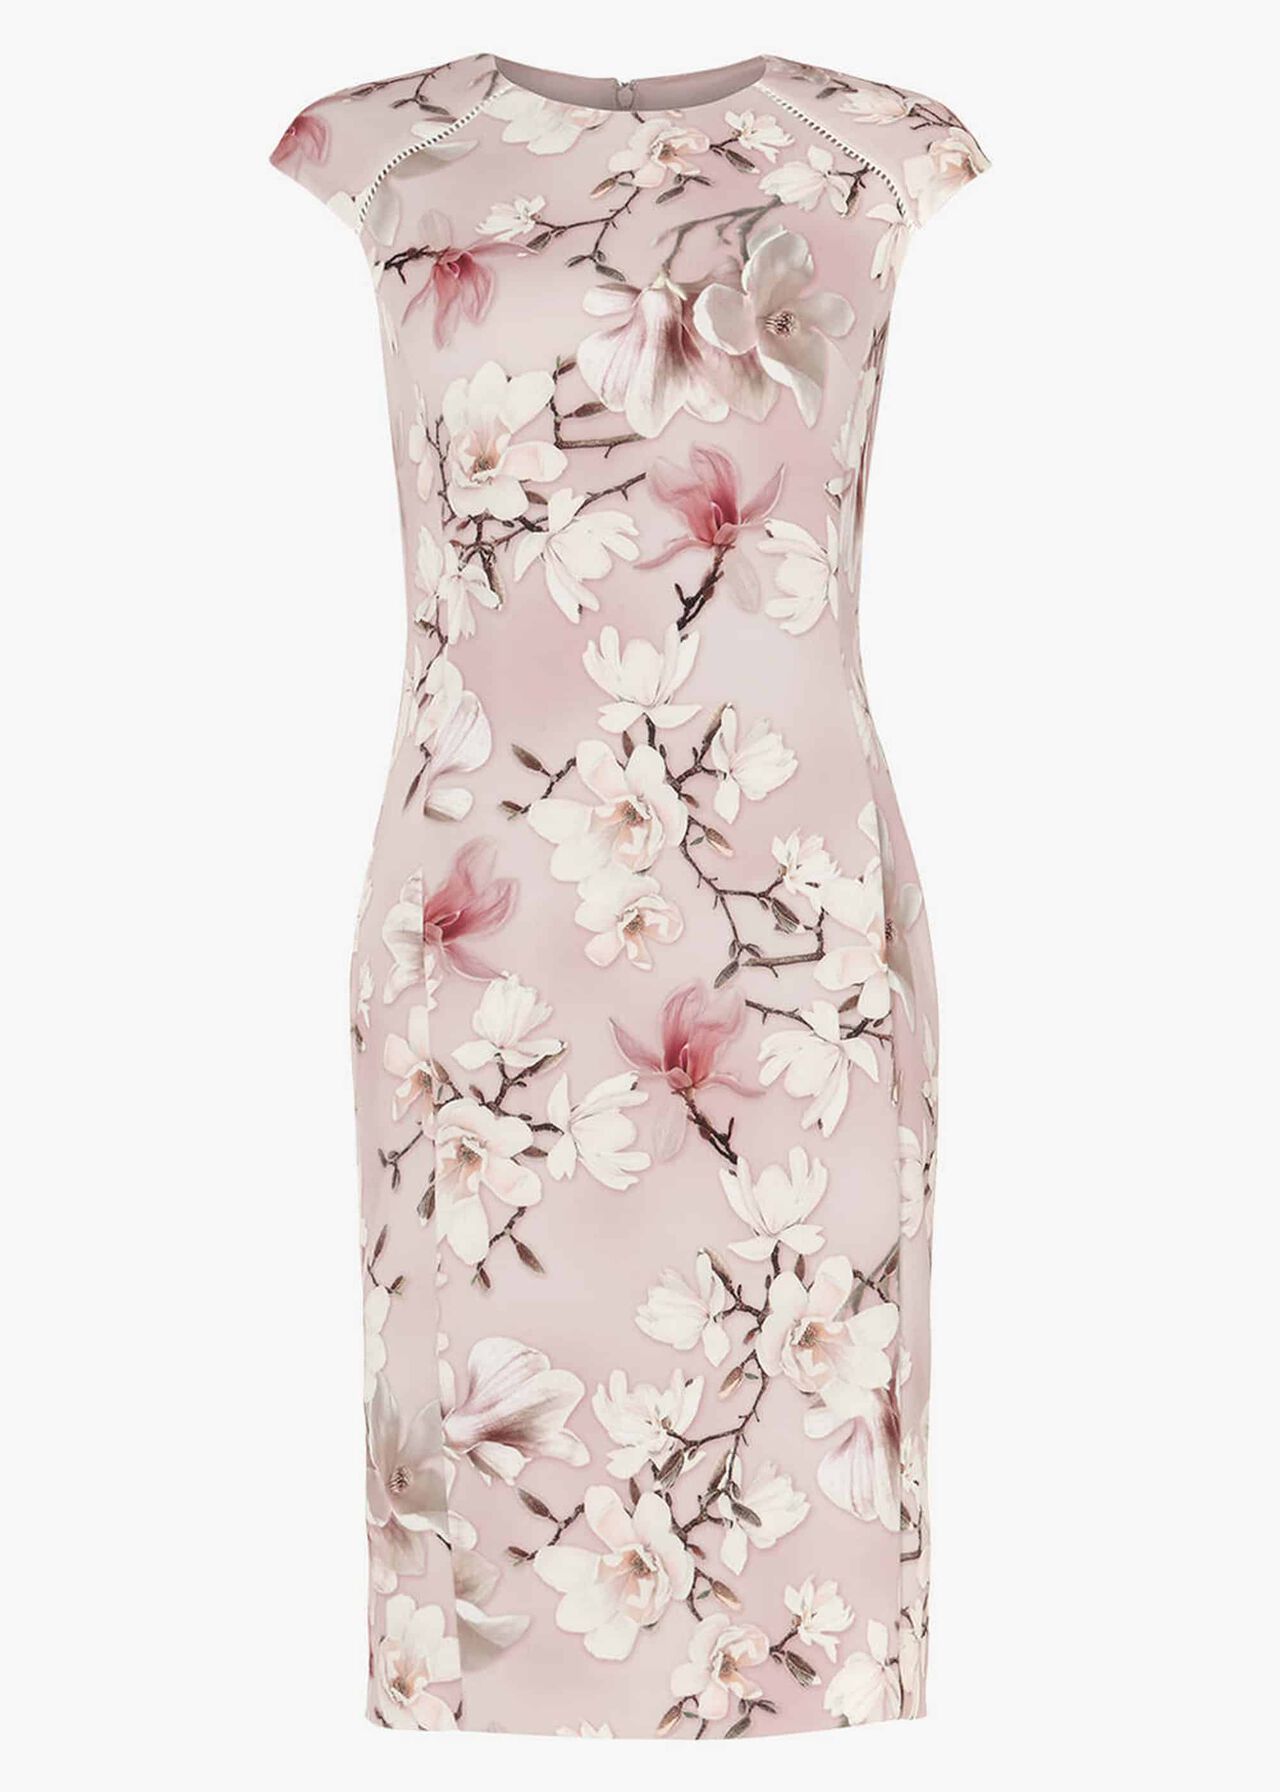 New Phase Eight Odetta Floral Rose Pink Dress Sz UK 16 rrp £140